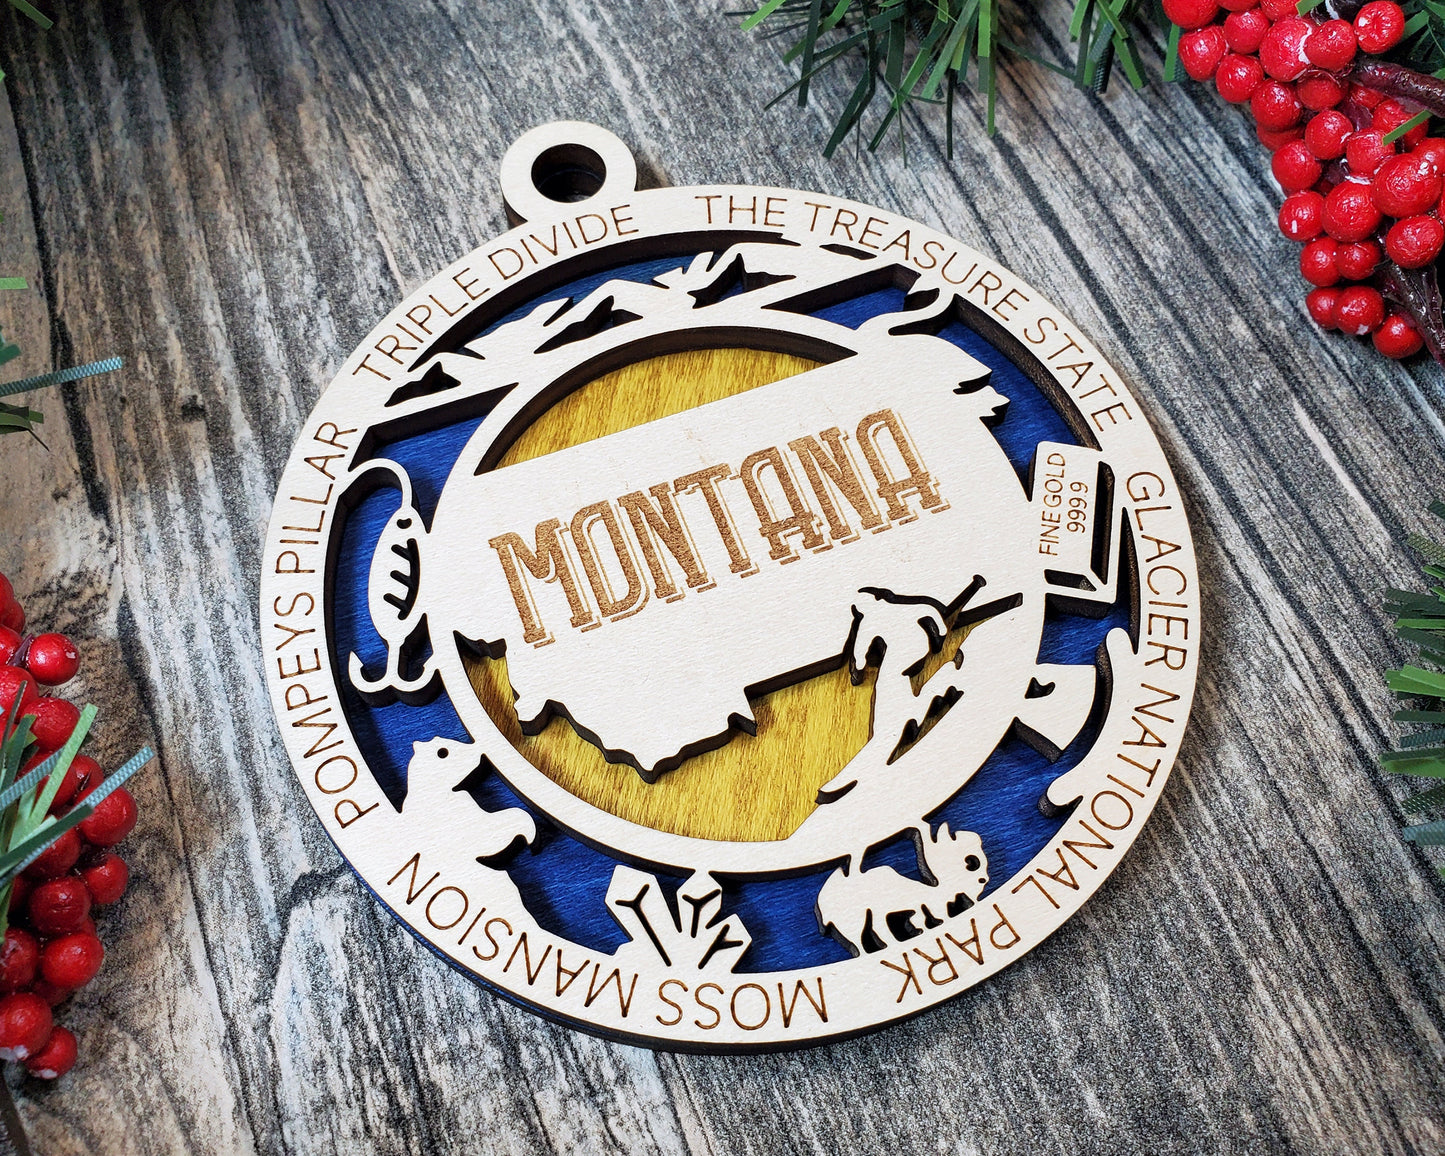 Montana State Ornament - SVG File Download - Sized for Glowforge - Laser Ready Digital Files